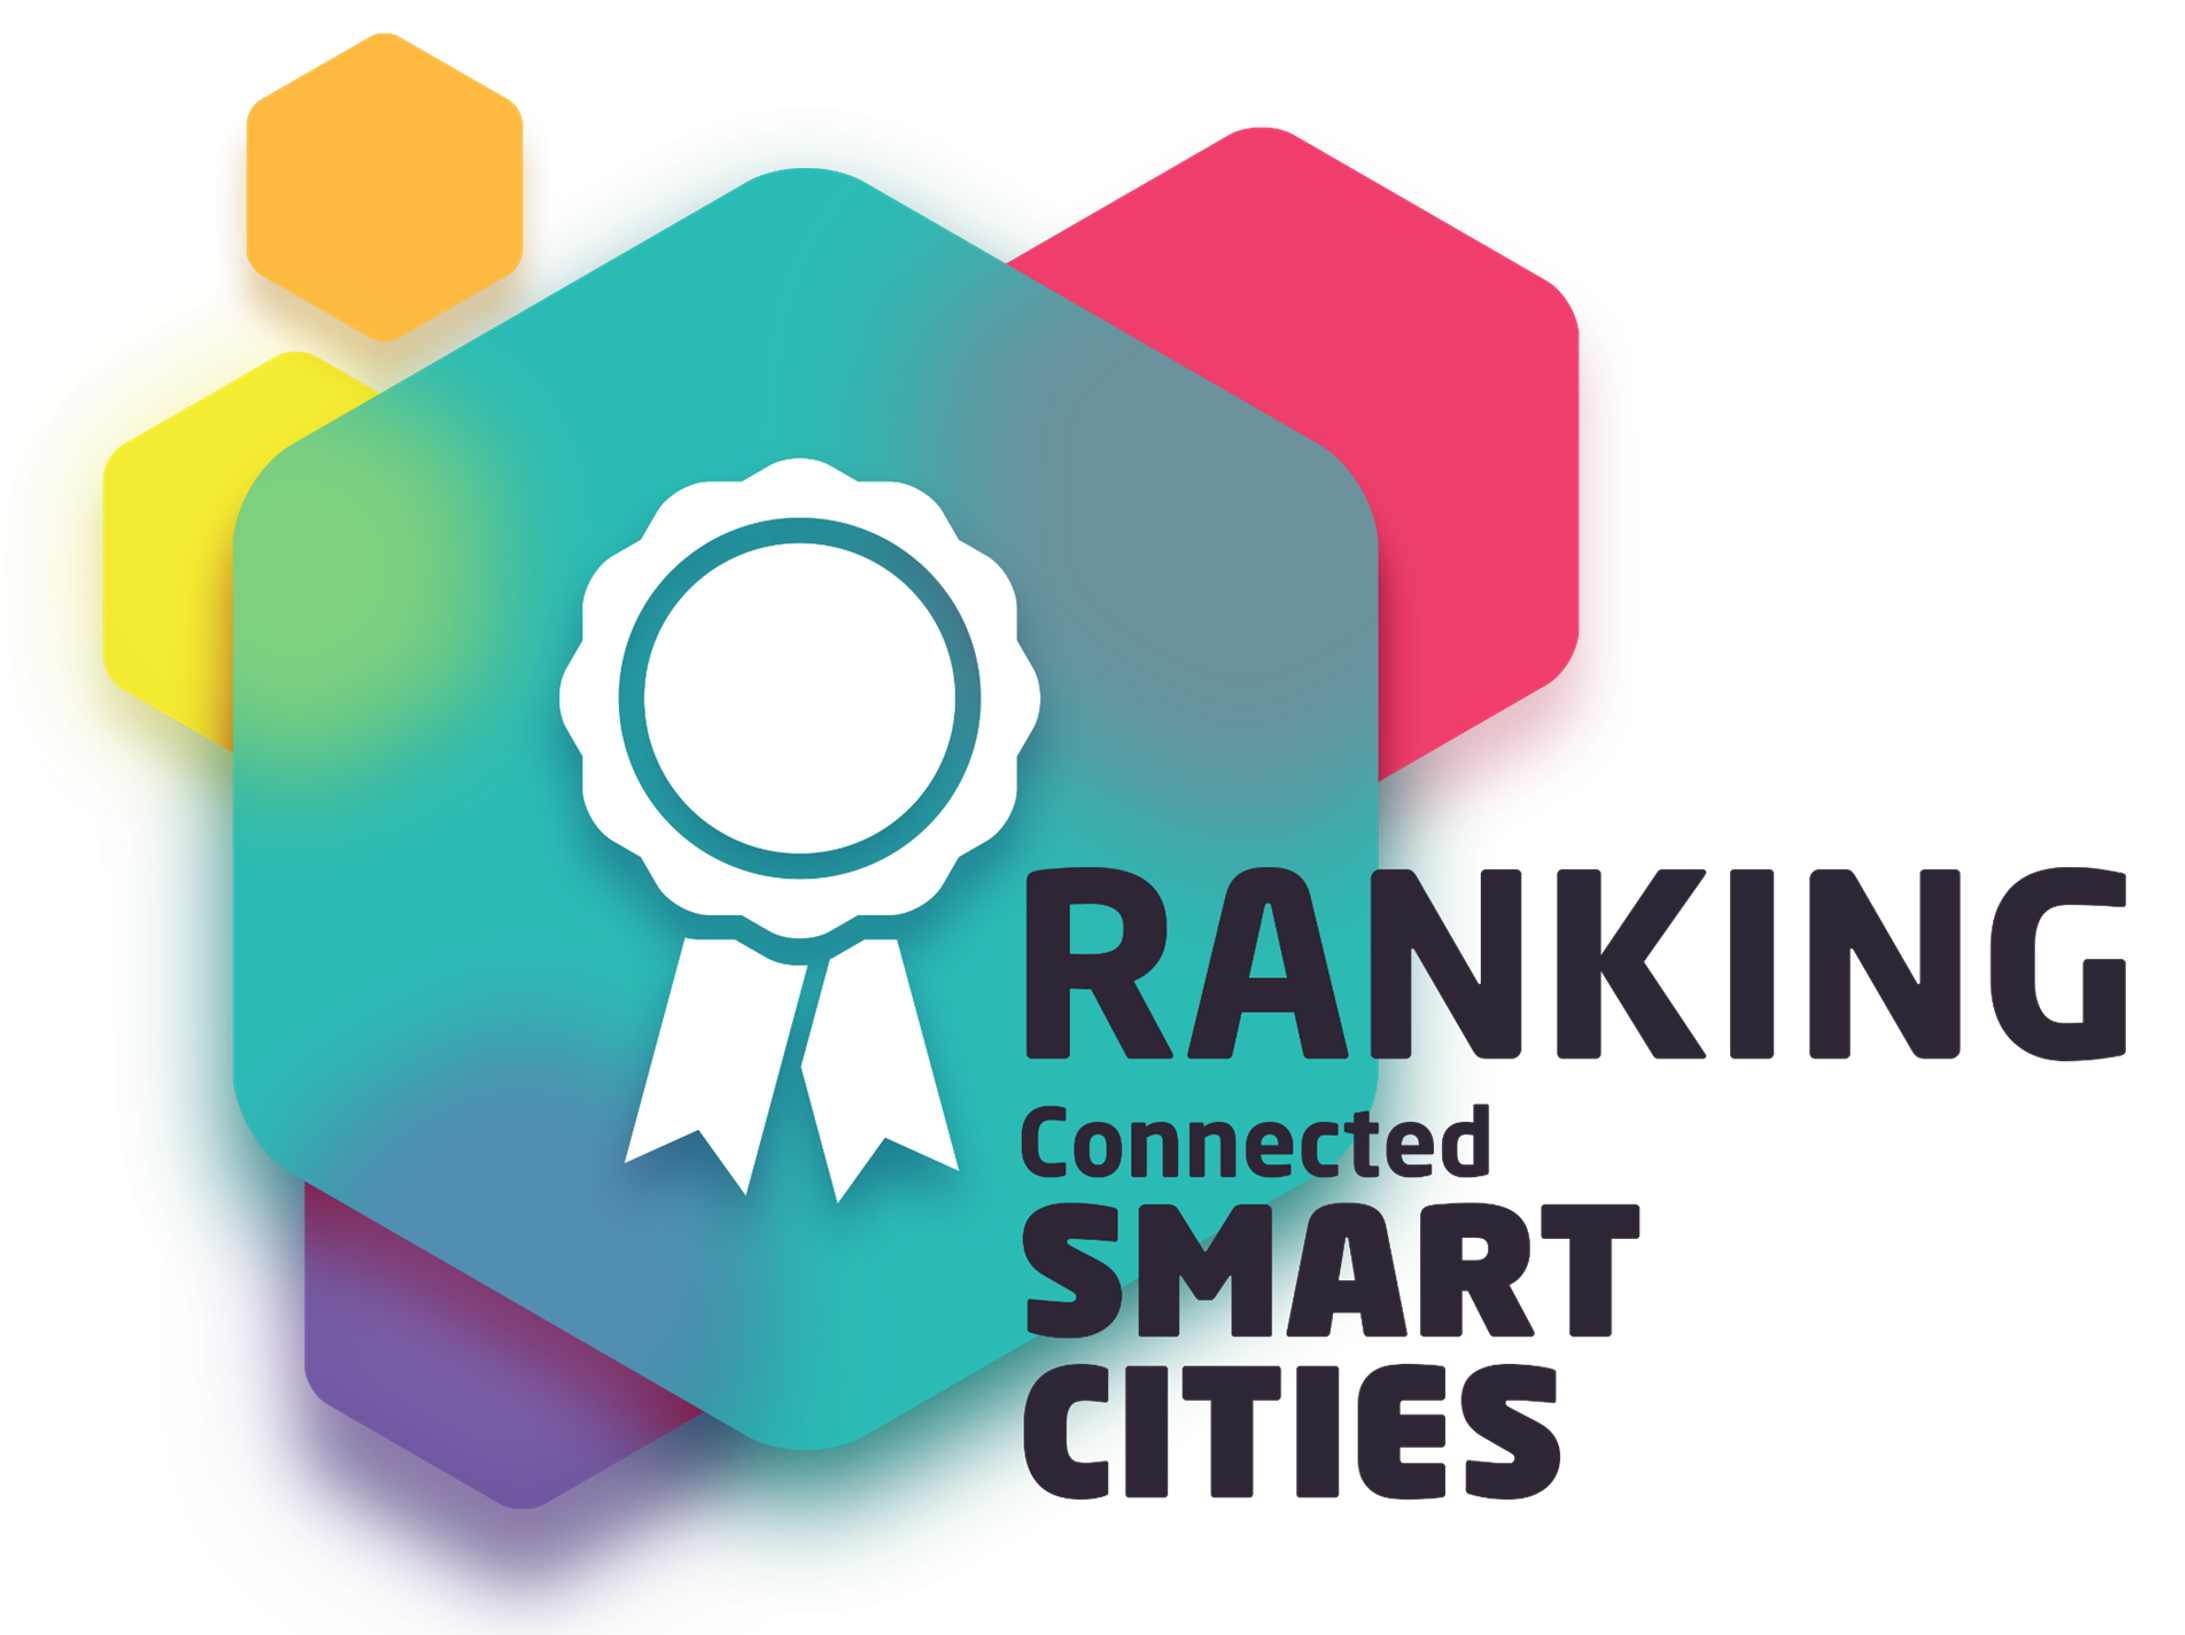 Ranking Connected Smart Cities 2015